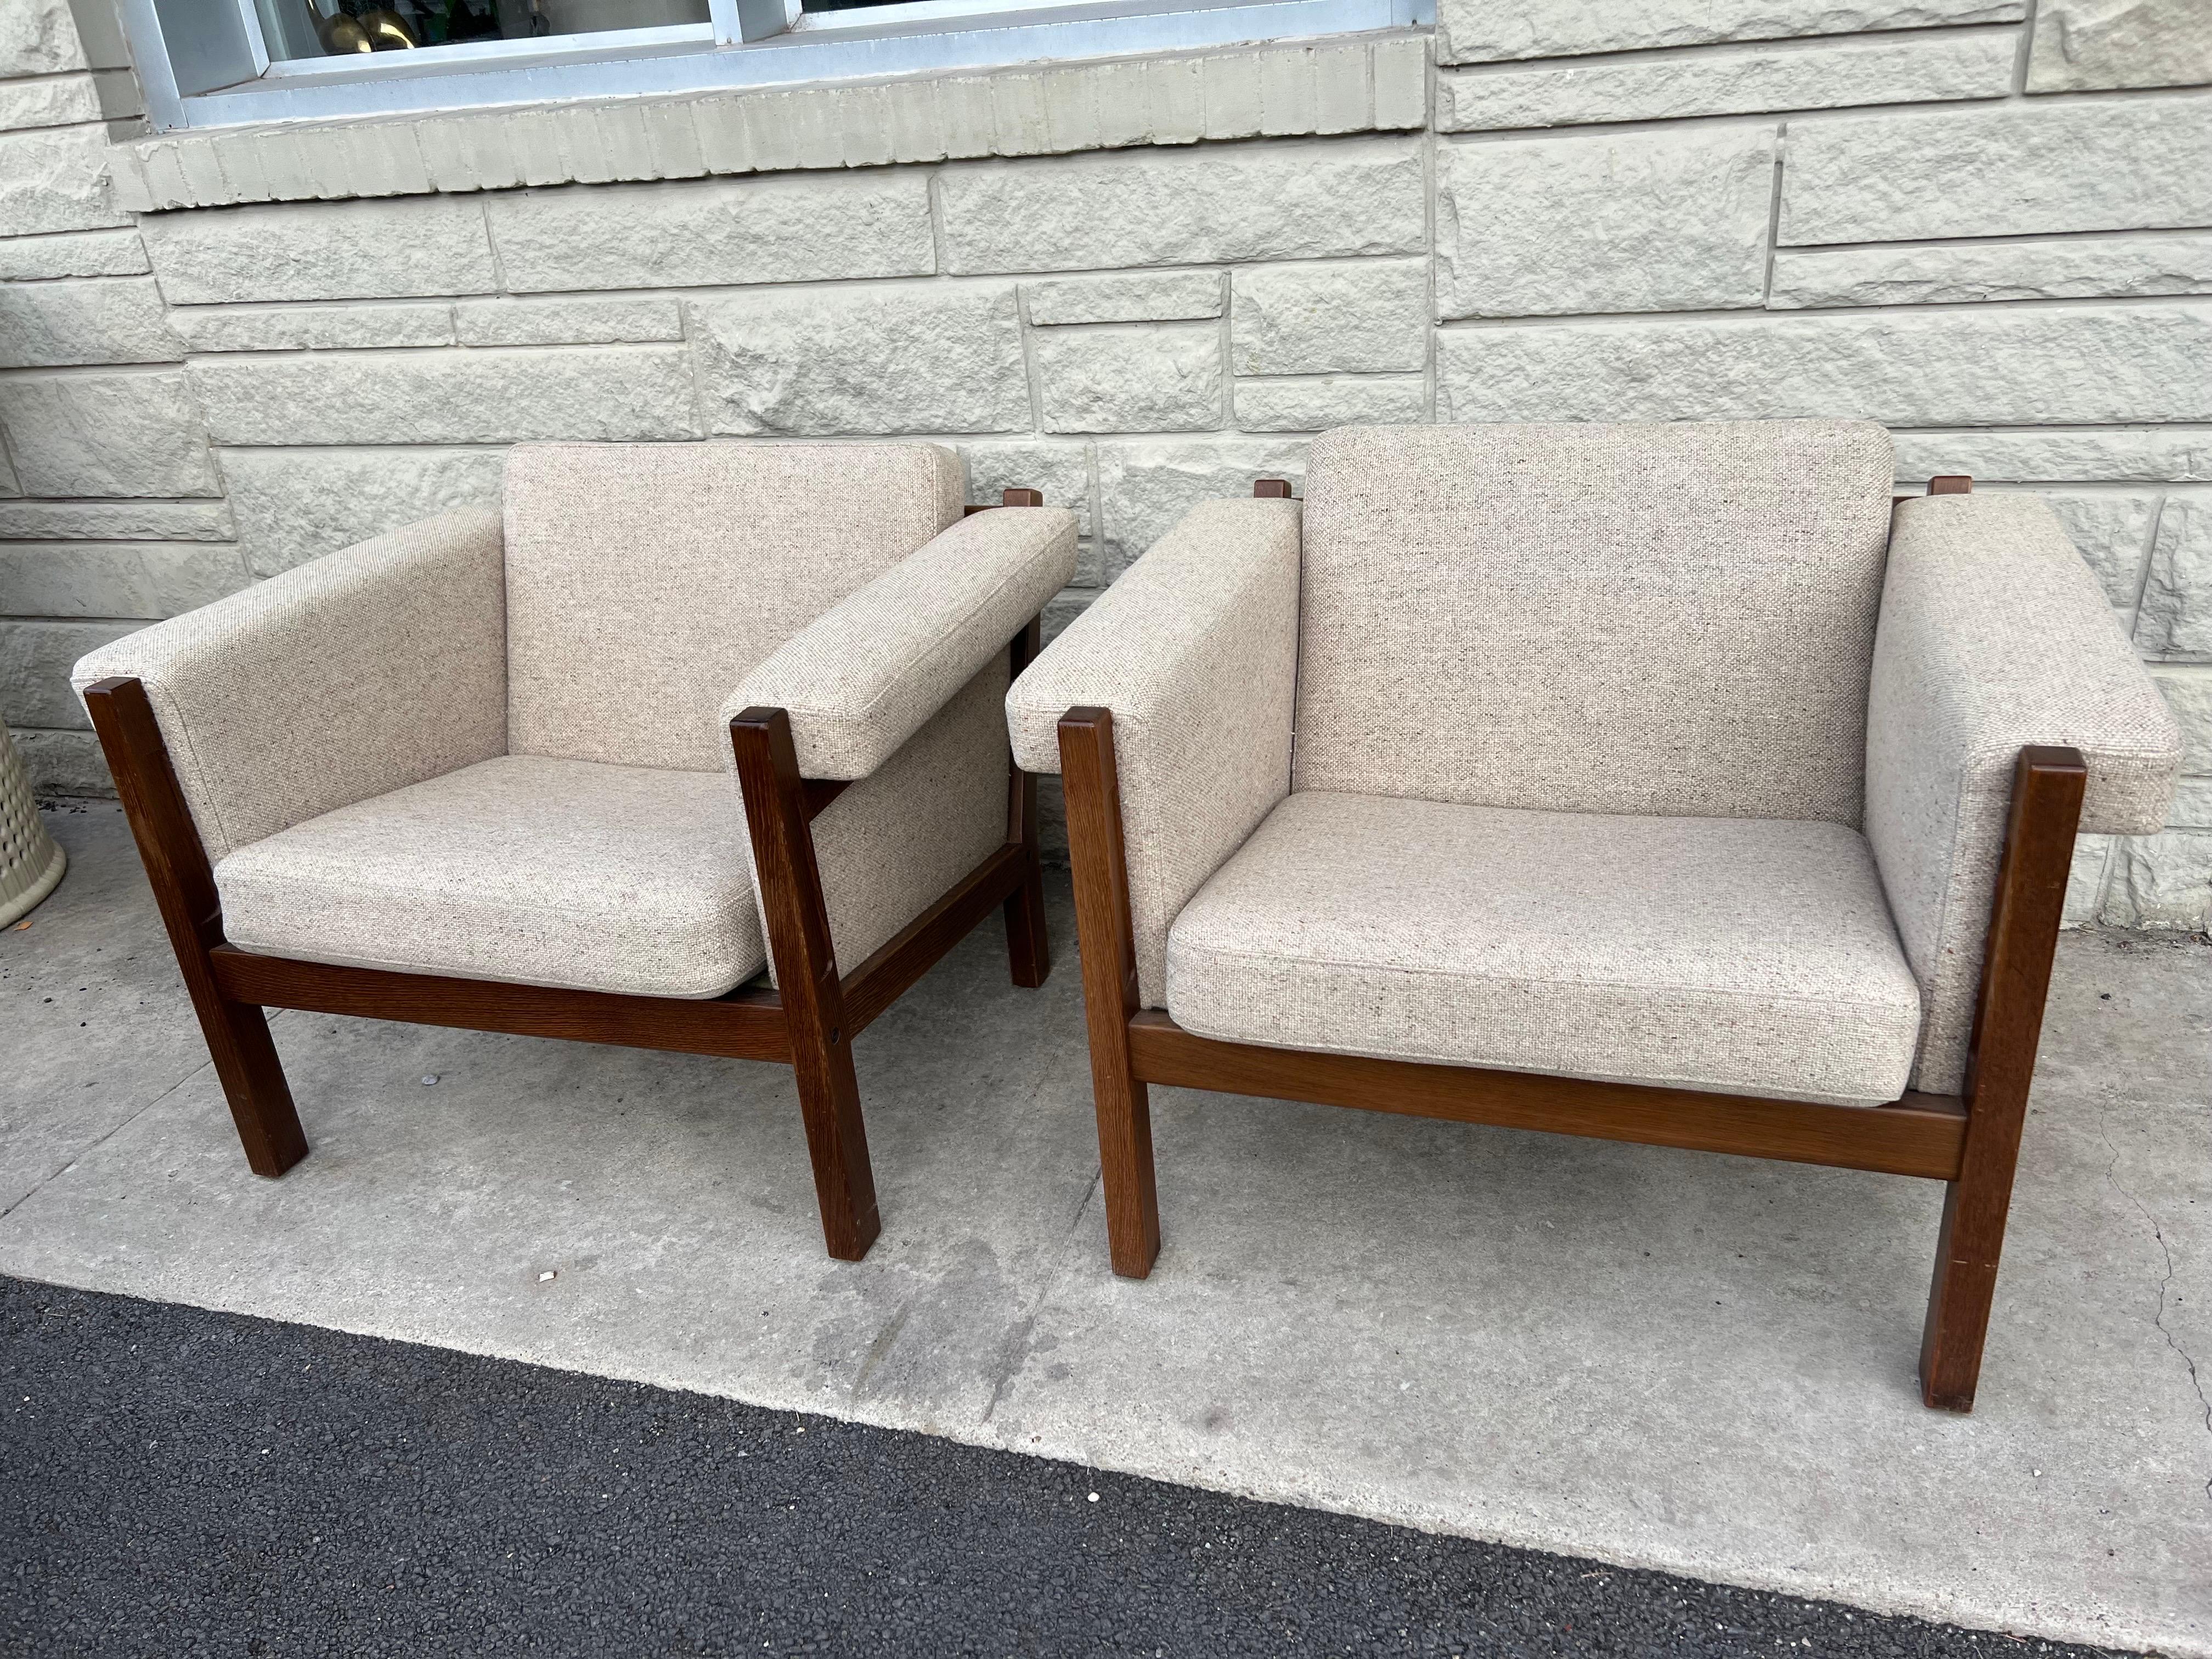 Mid-Century Modern Hans Wegner lounge armchairs GE-40 for GETAMA, Denmark, circa 1960s and solid oak. Fabric and frame are in great overall condition. Hans J. Wegner is considered to be a prolific designer of the 20th century. 
measurements: 36.25